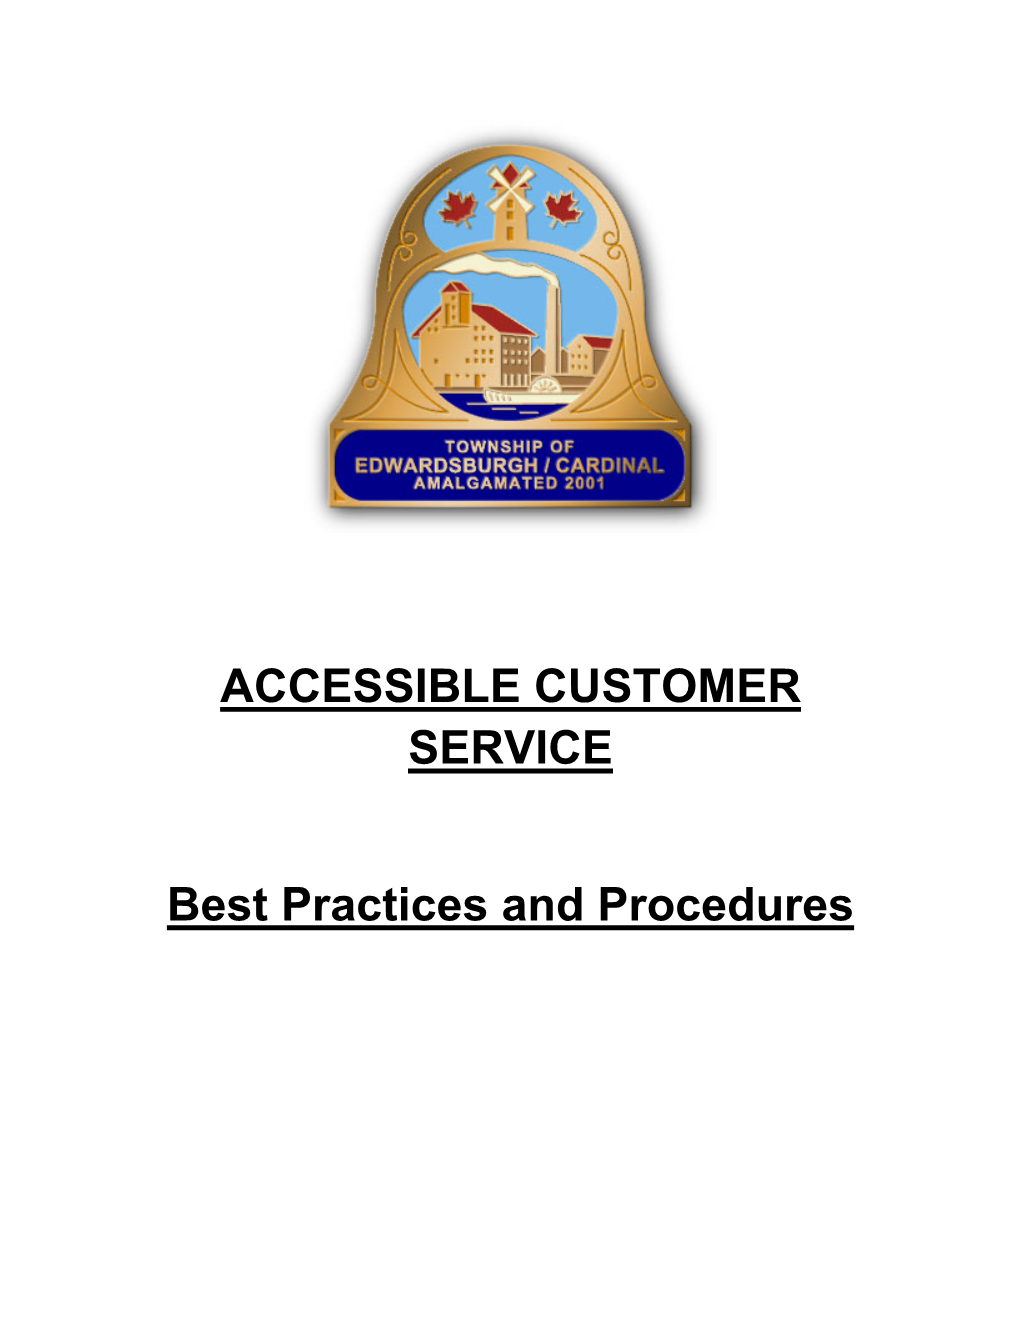 ACCESSIBLE CUSTOMER SERVICE Best Practices and Procedures